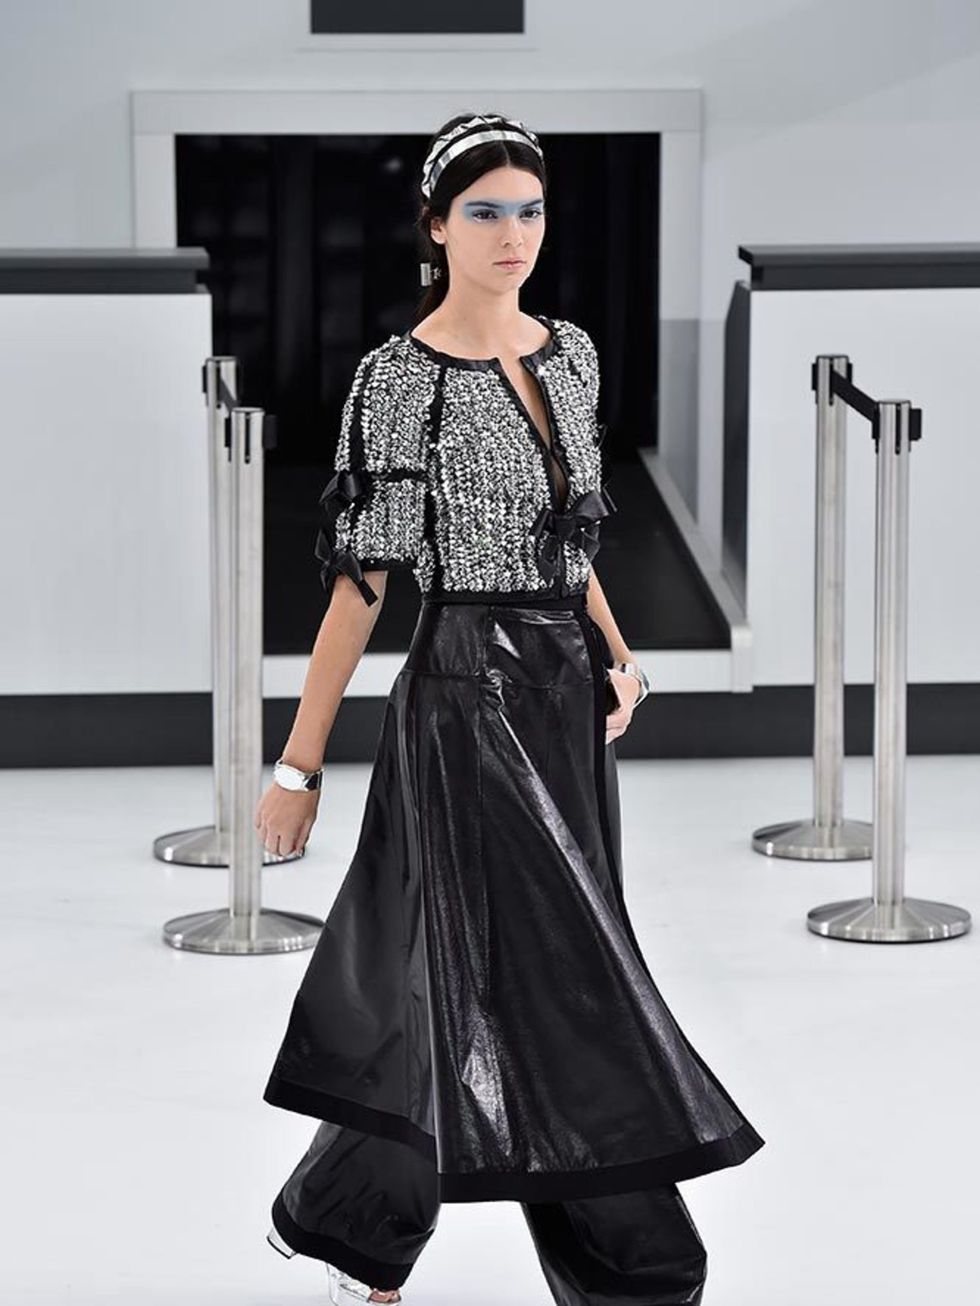 Kendall Jenner on the Chanel catwalk during during Paris Fashion Week, September 2015